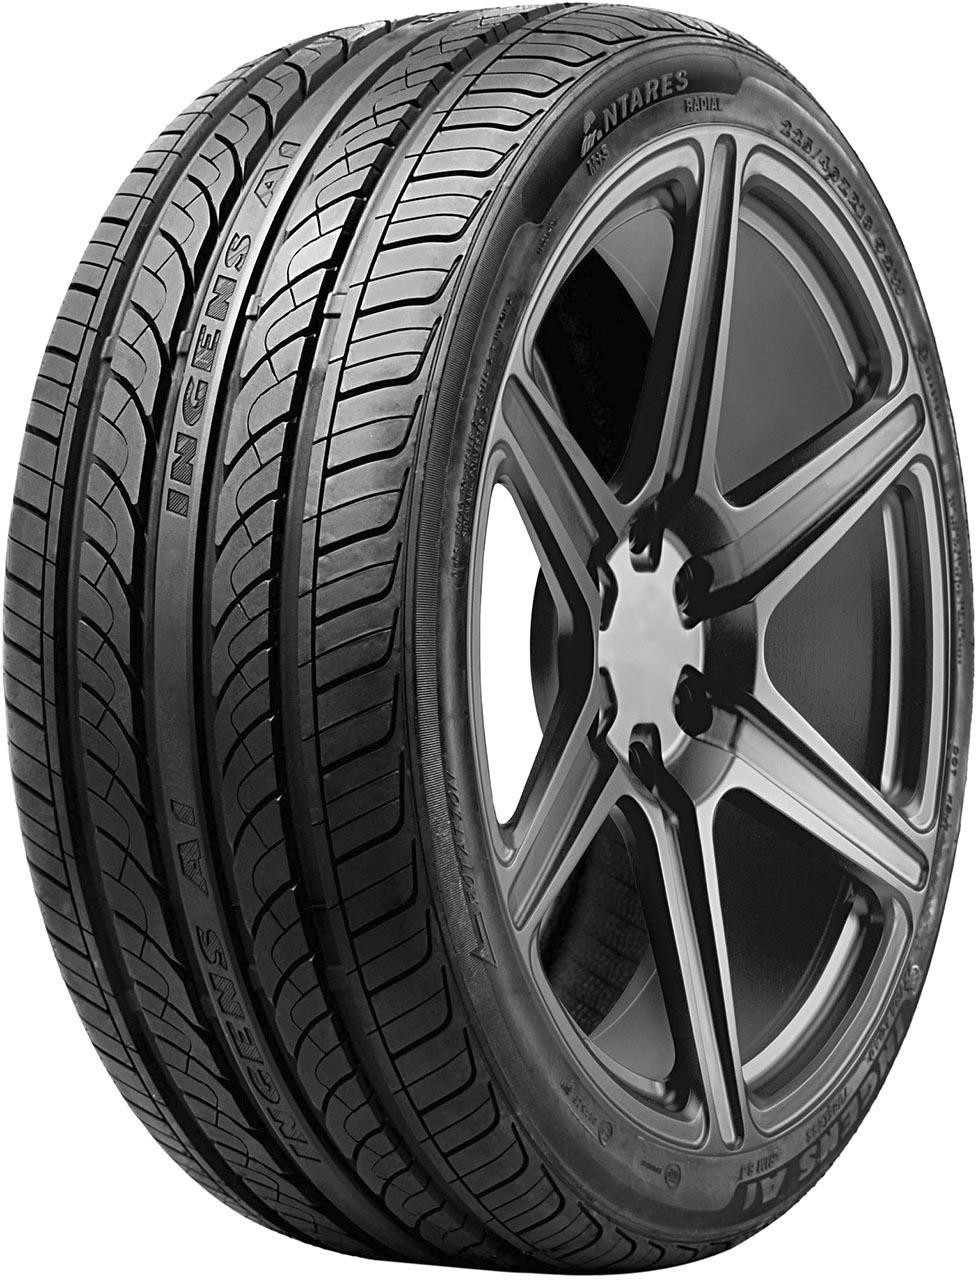 Antares Tires Ingens A1 205/55 R16 94W XL